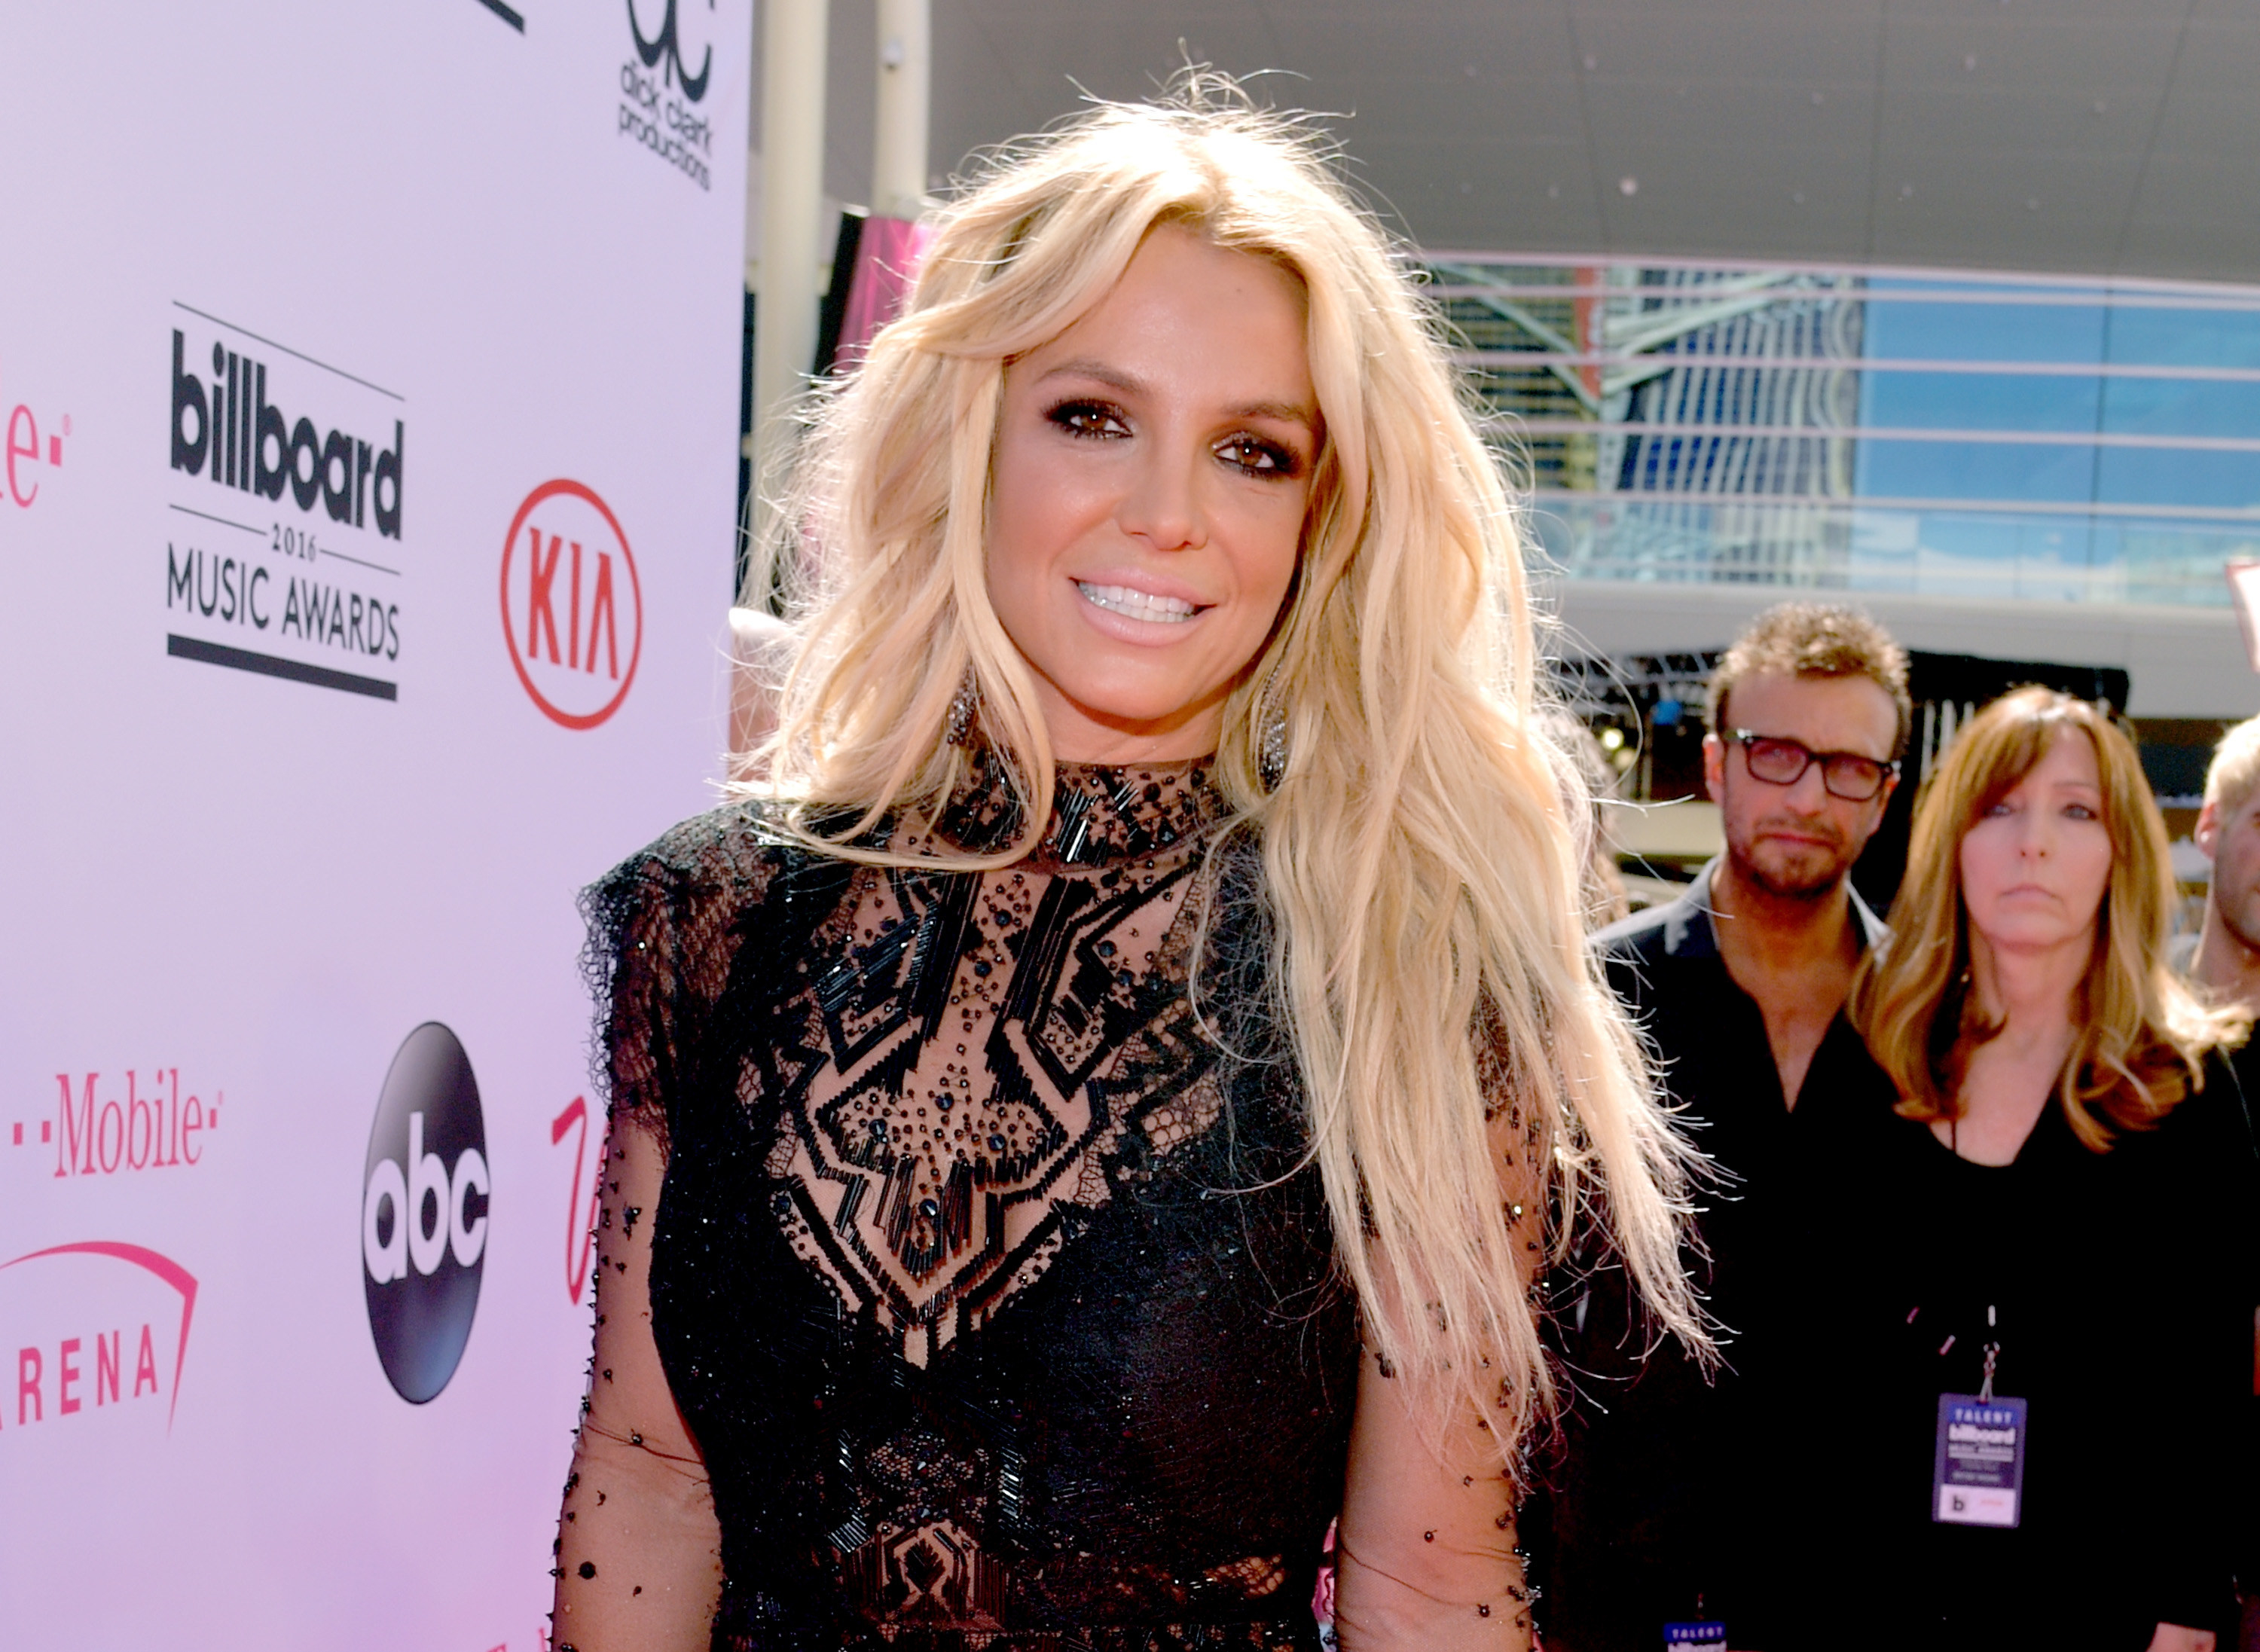 A close-up of Britney on the red carpet